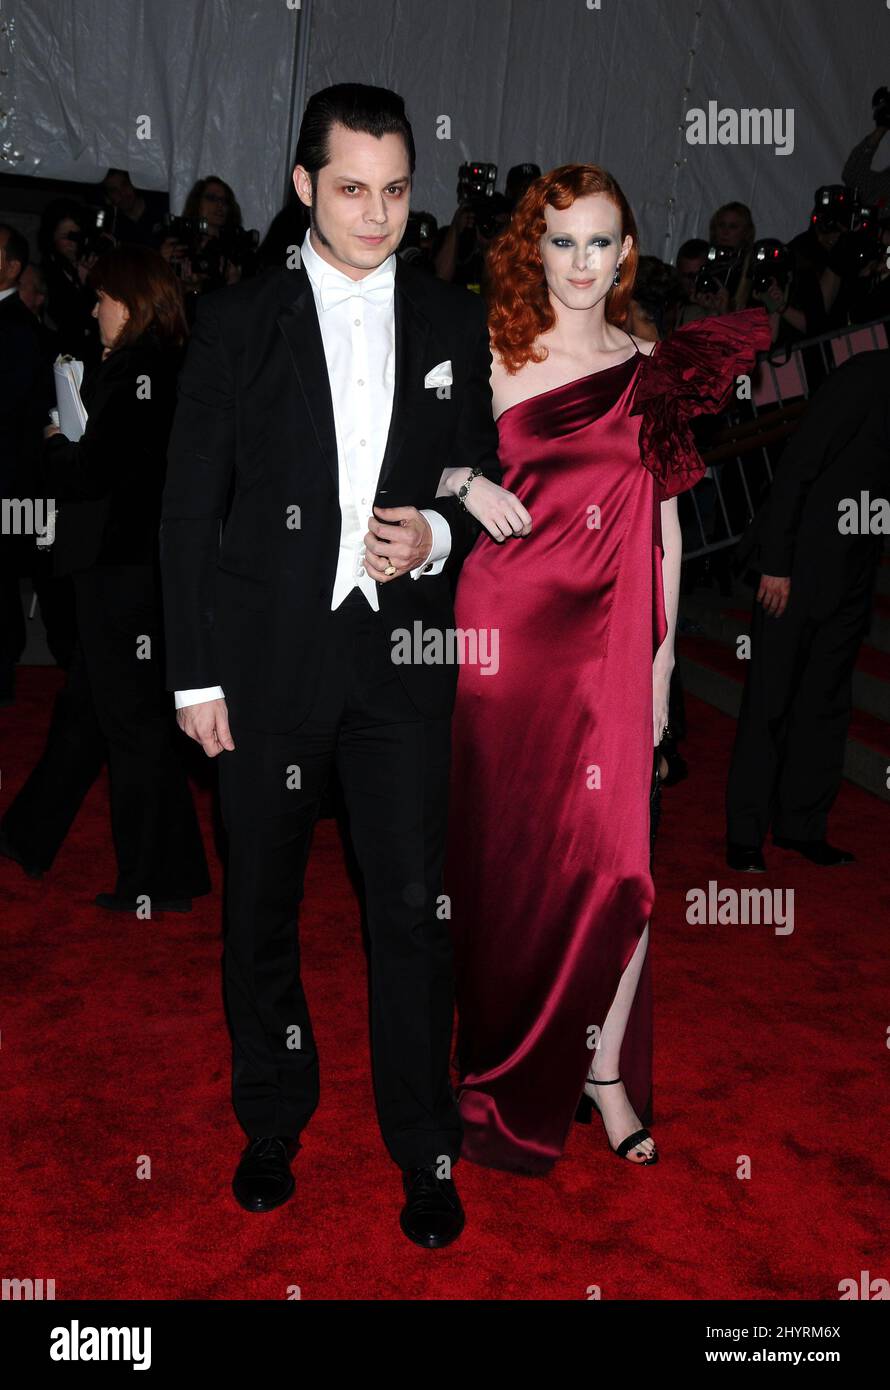 Jack White and Karen Elson arriving at the Costume Institute Gala held at the Metropolitan Museum in New York City. Stock Photo